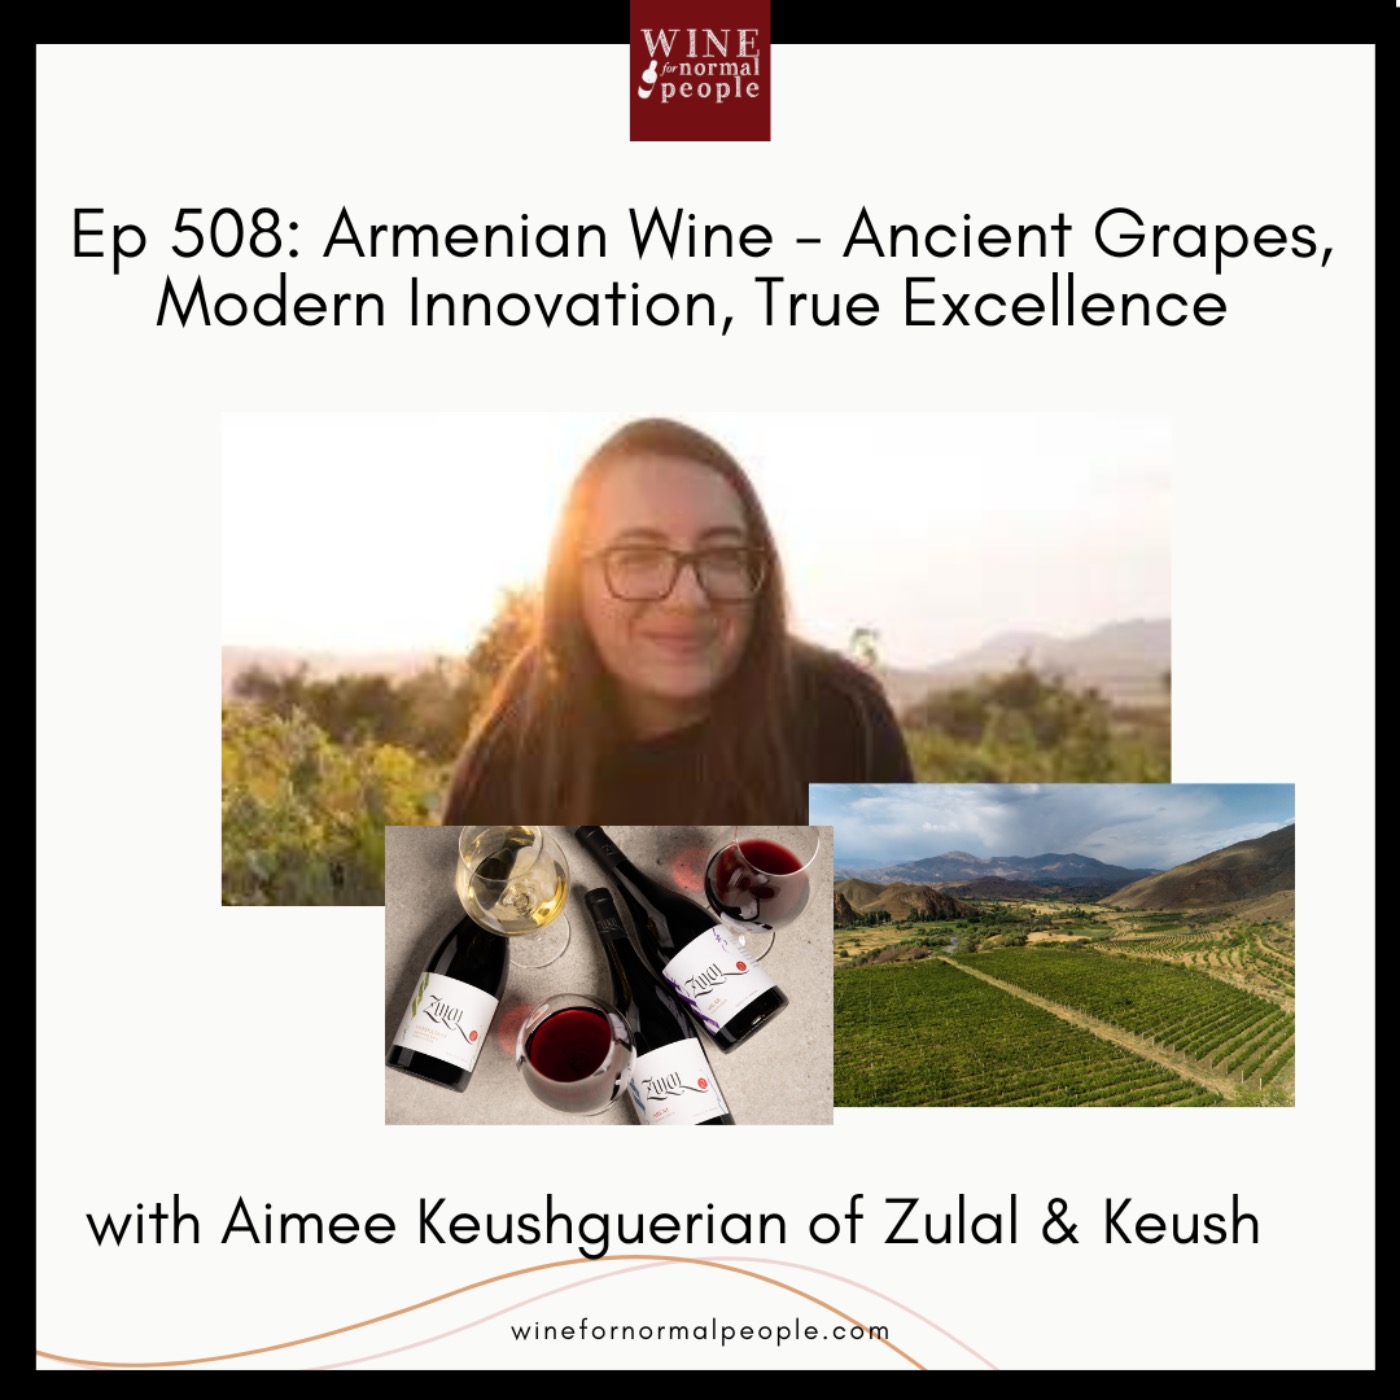 Ep 508: Armenian Wine - Ancient Grapes, Modern Innovation, True Excellence with Aimee Keushguerian of Zulal & Keush